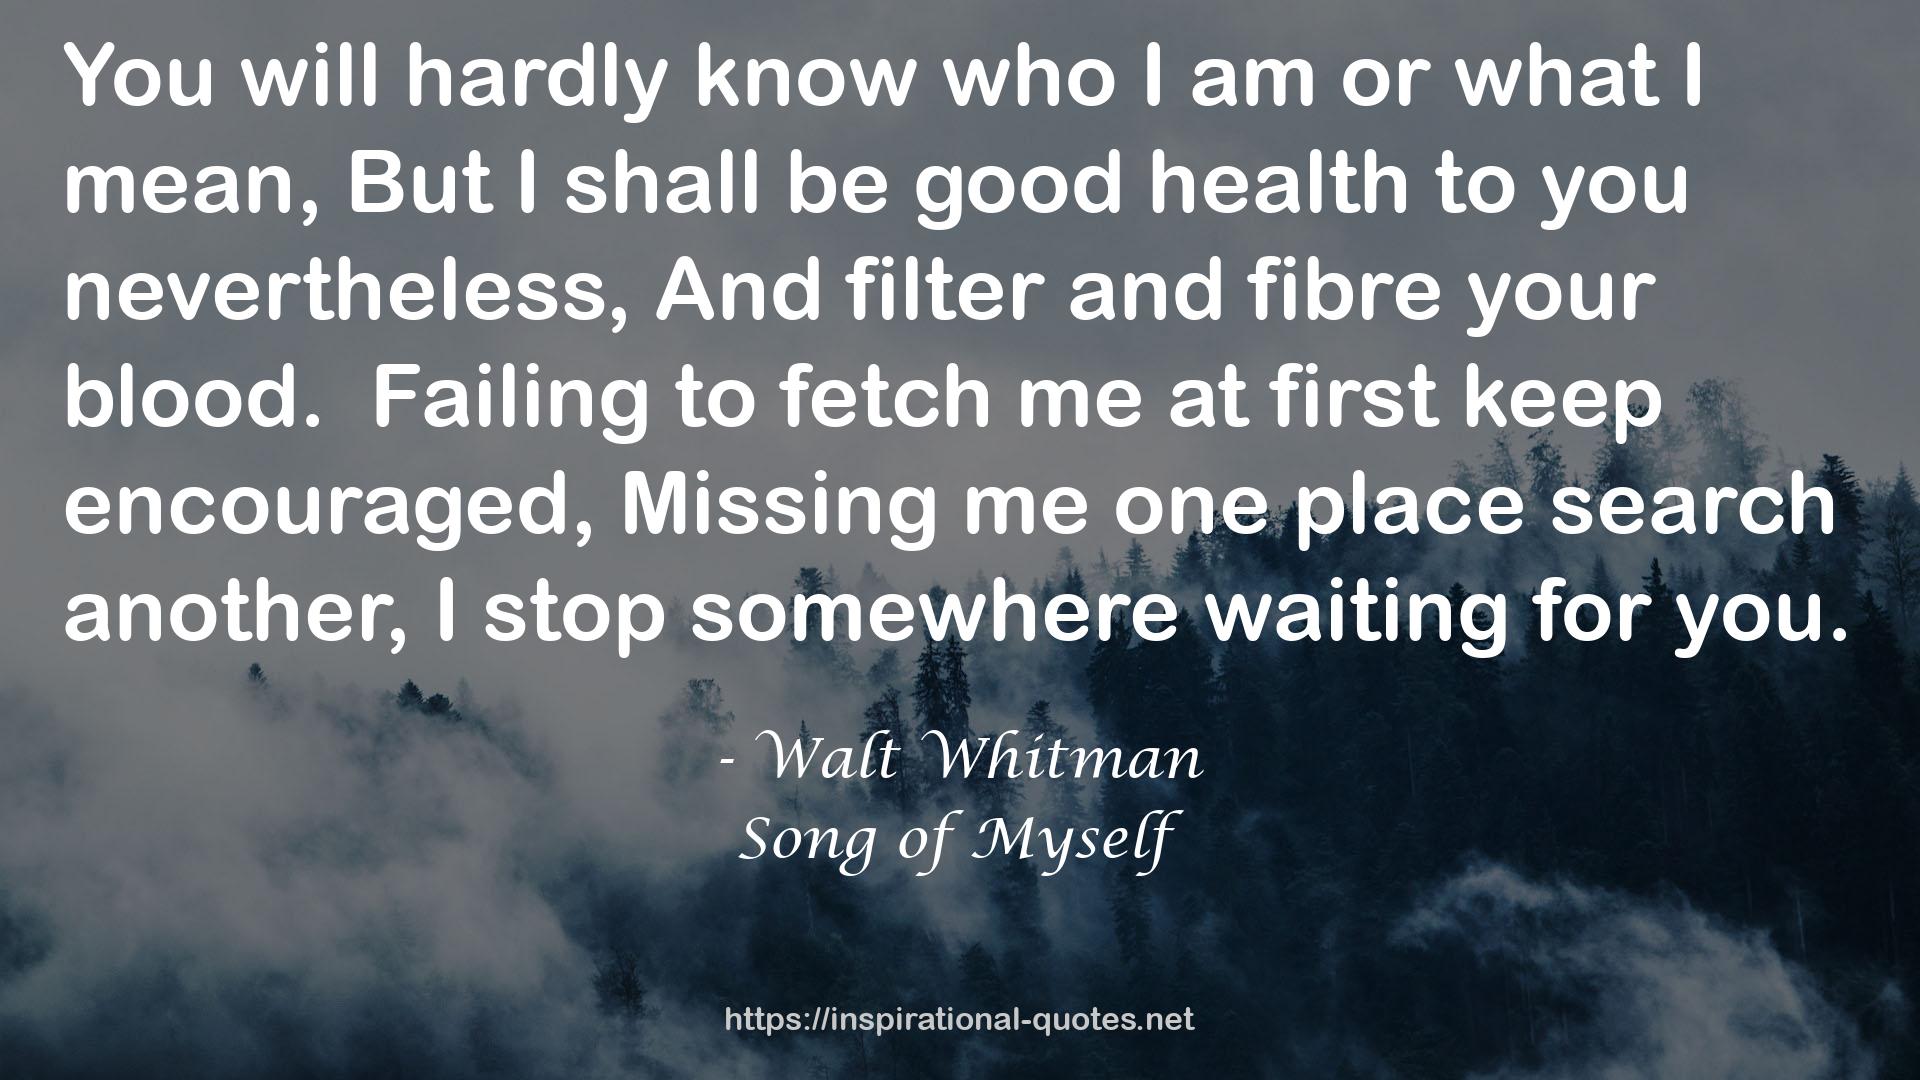 Song of Myself QUOTES